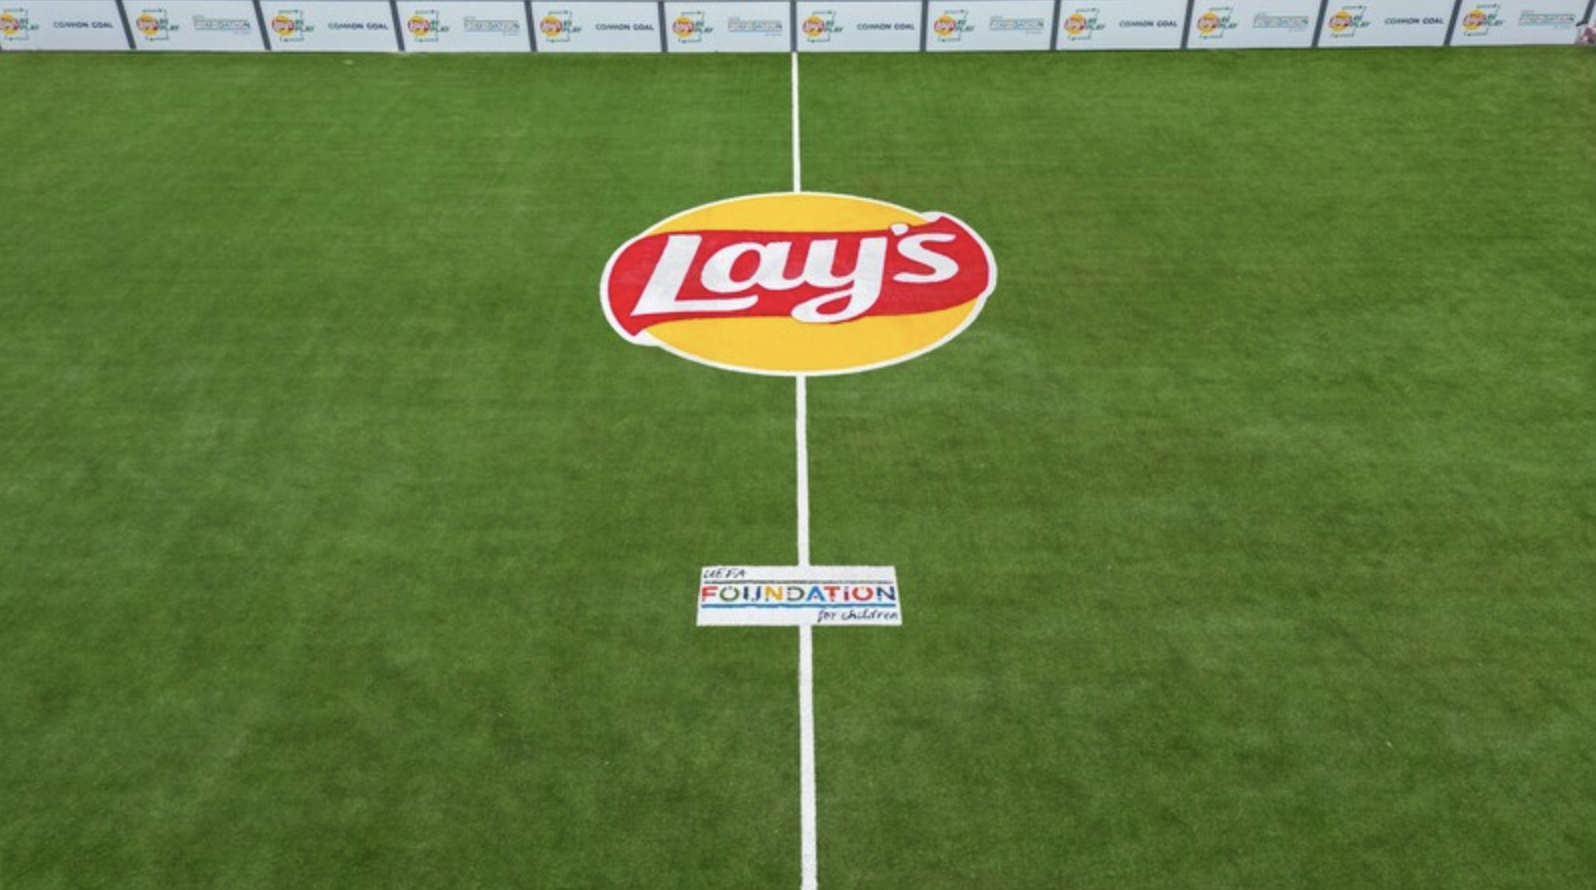 Lay's Unveils First Lay's RePlay Soccer Field in the U.S. Made from Reused Chip Bag Packaging